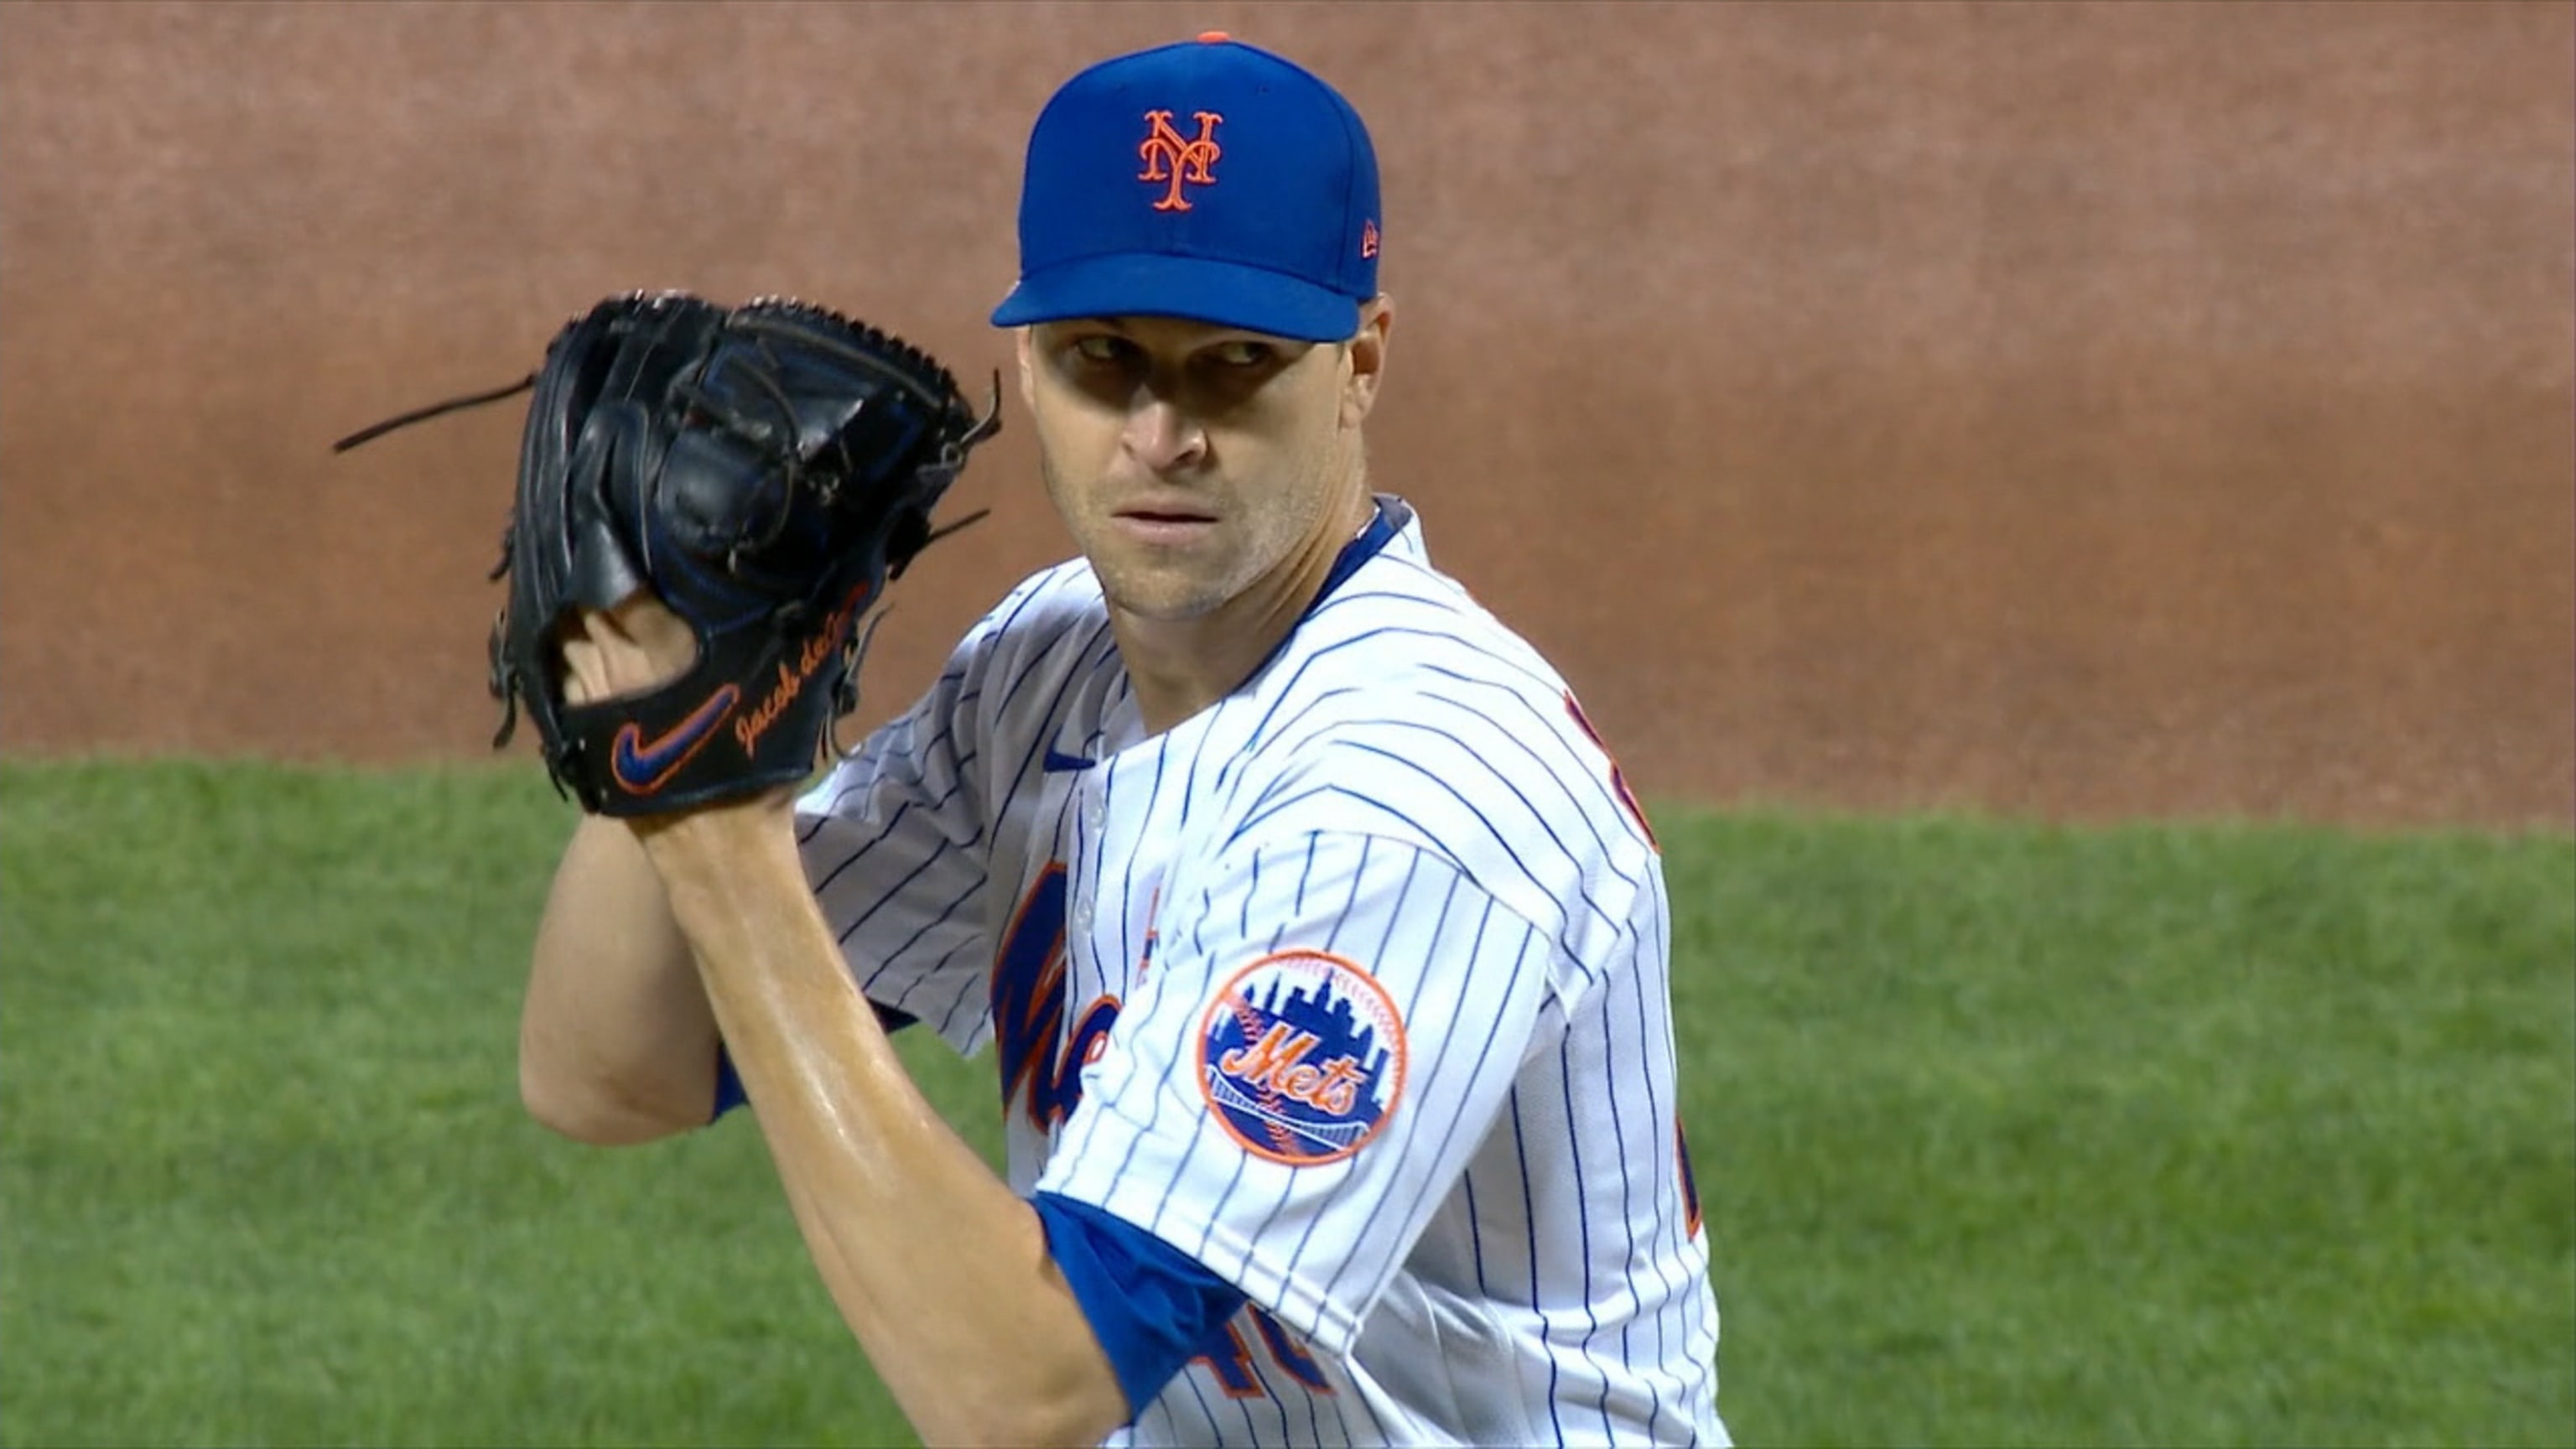 Jacob deGrom's 41.0% whiff rate